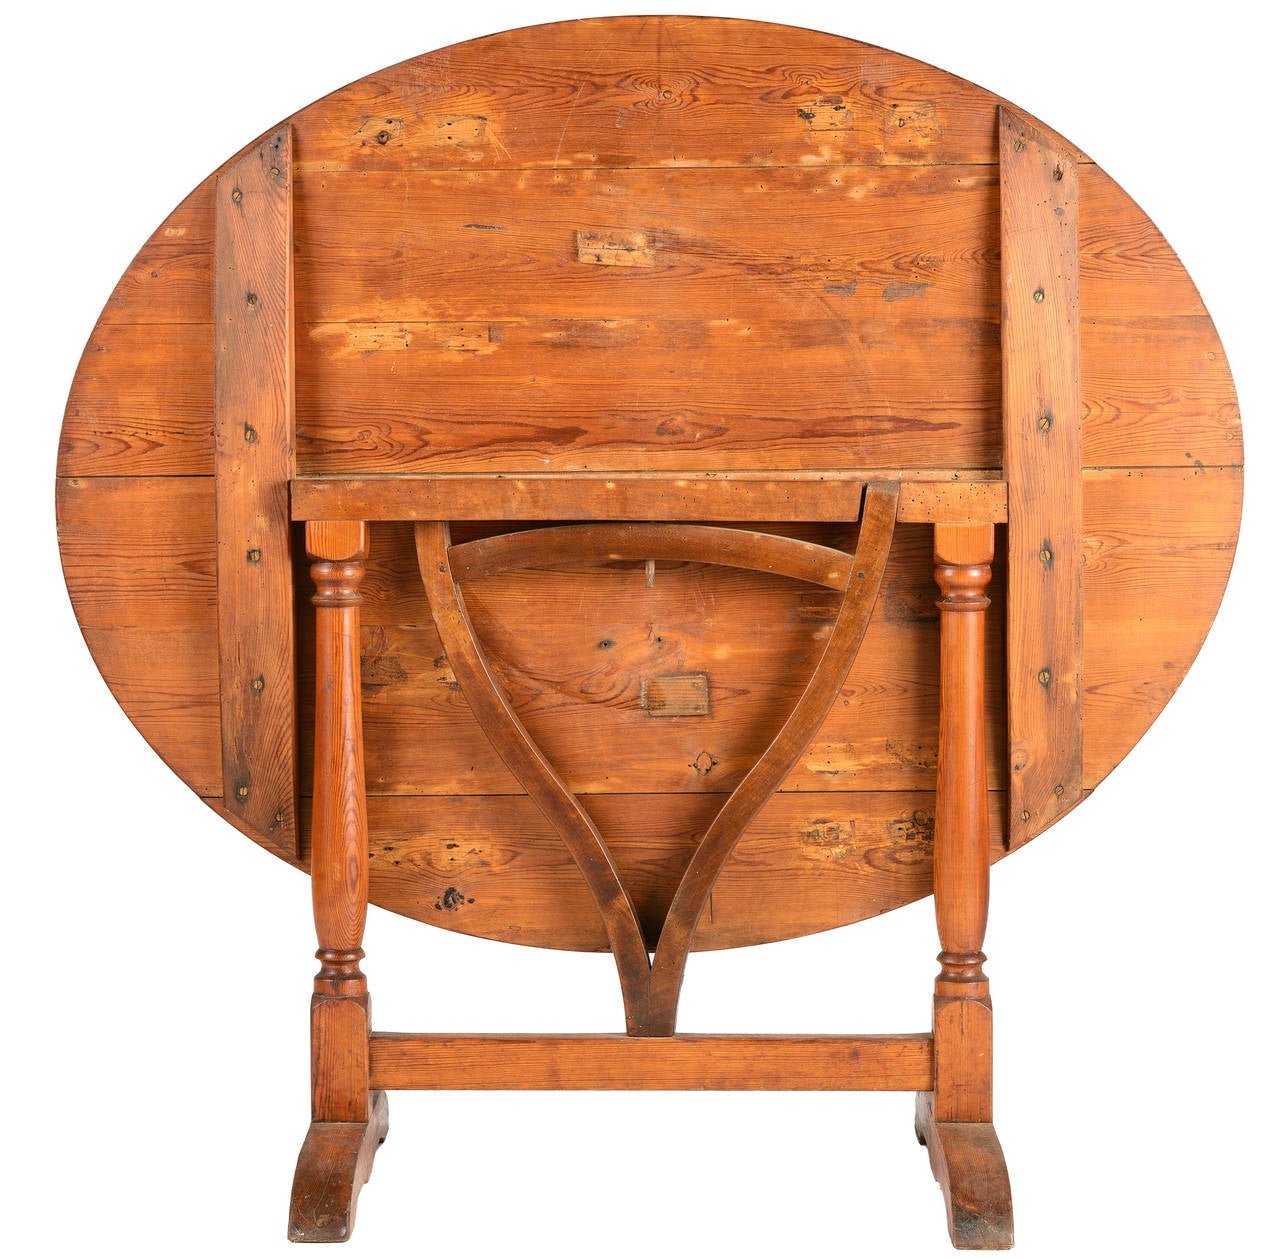 Oval pine wine tasting table from Southwest France with lyre swivel arm to support table when upright.  The legs are turned with a block base and an H stretcher.  The top is made up of six boards.  The table is a versatile size seating 4-6.